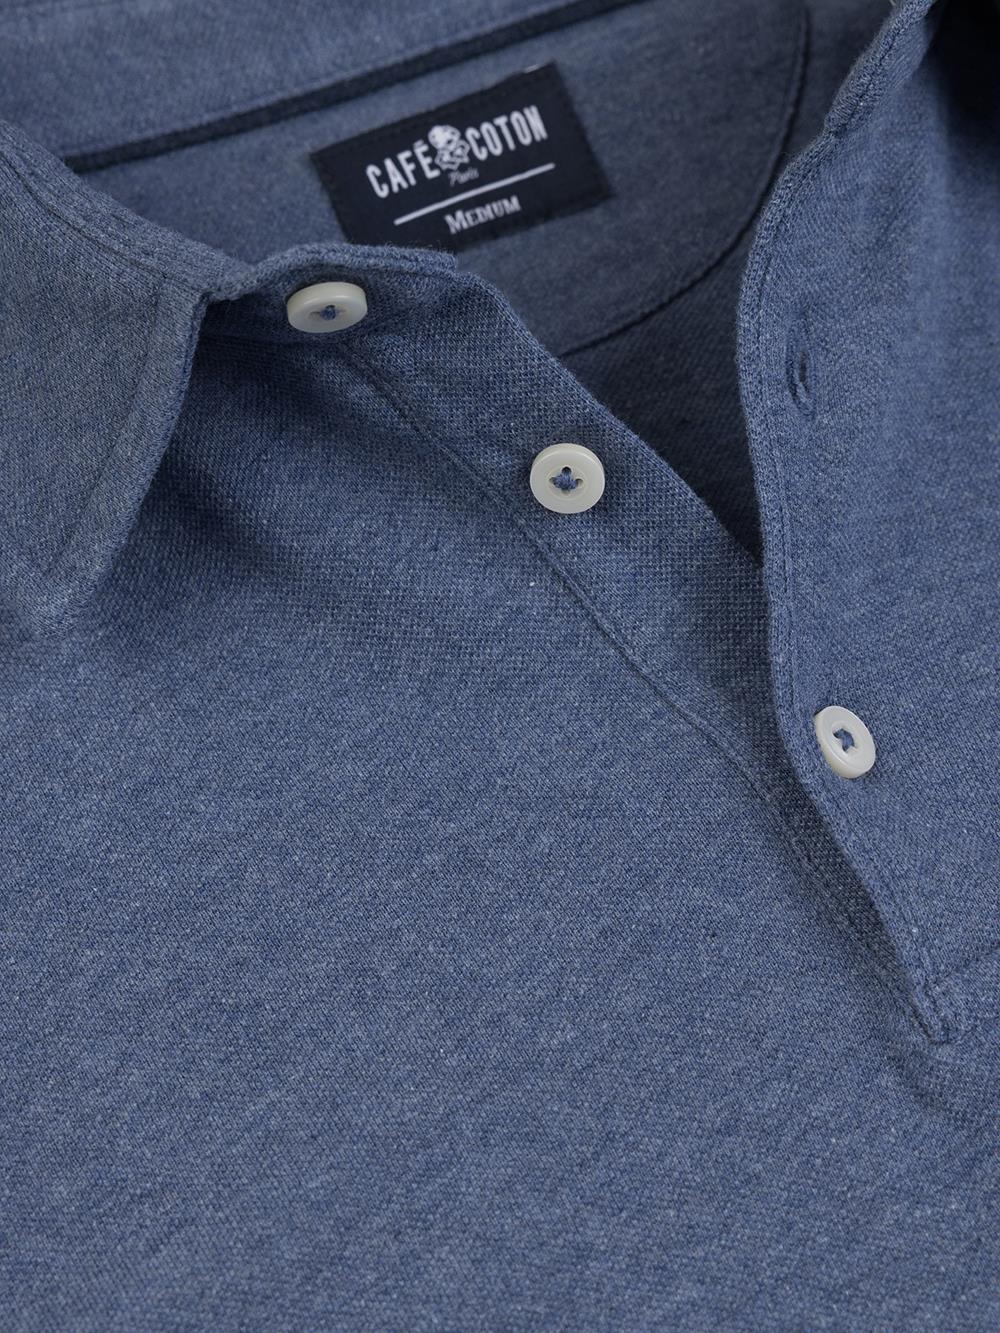 Heritage Polo in mottled indigo pique - JEAN - Male